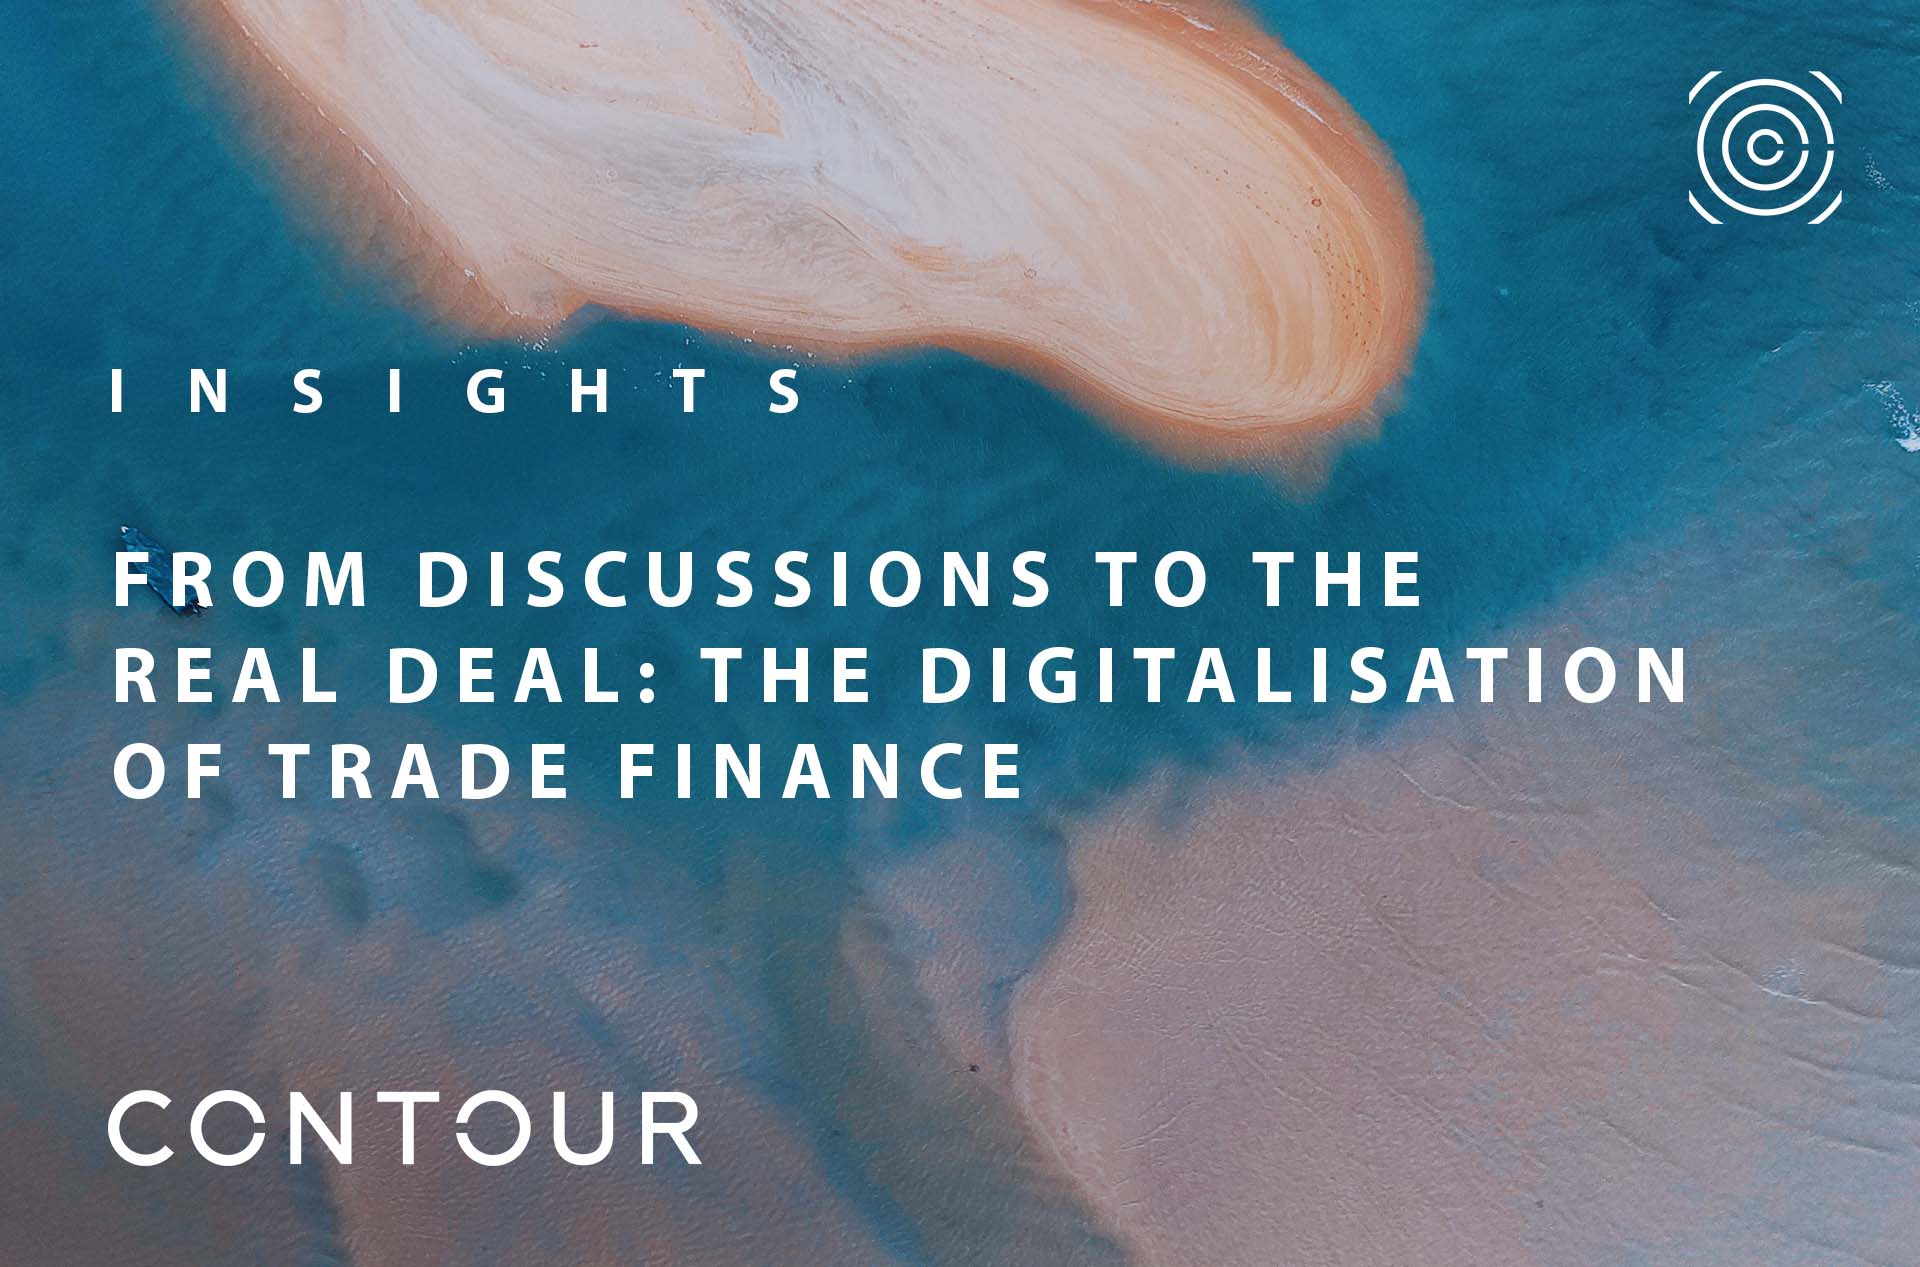 From discussions to the real deal: The digitalisation of trade finance